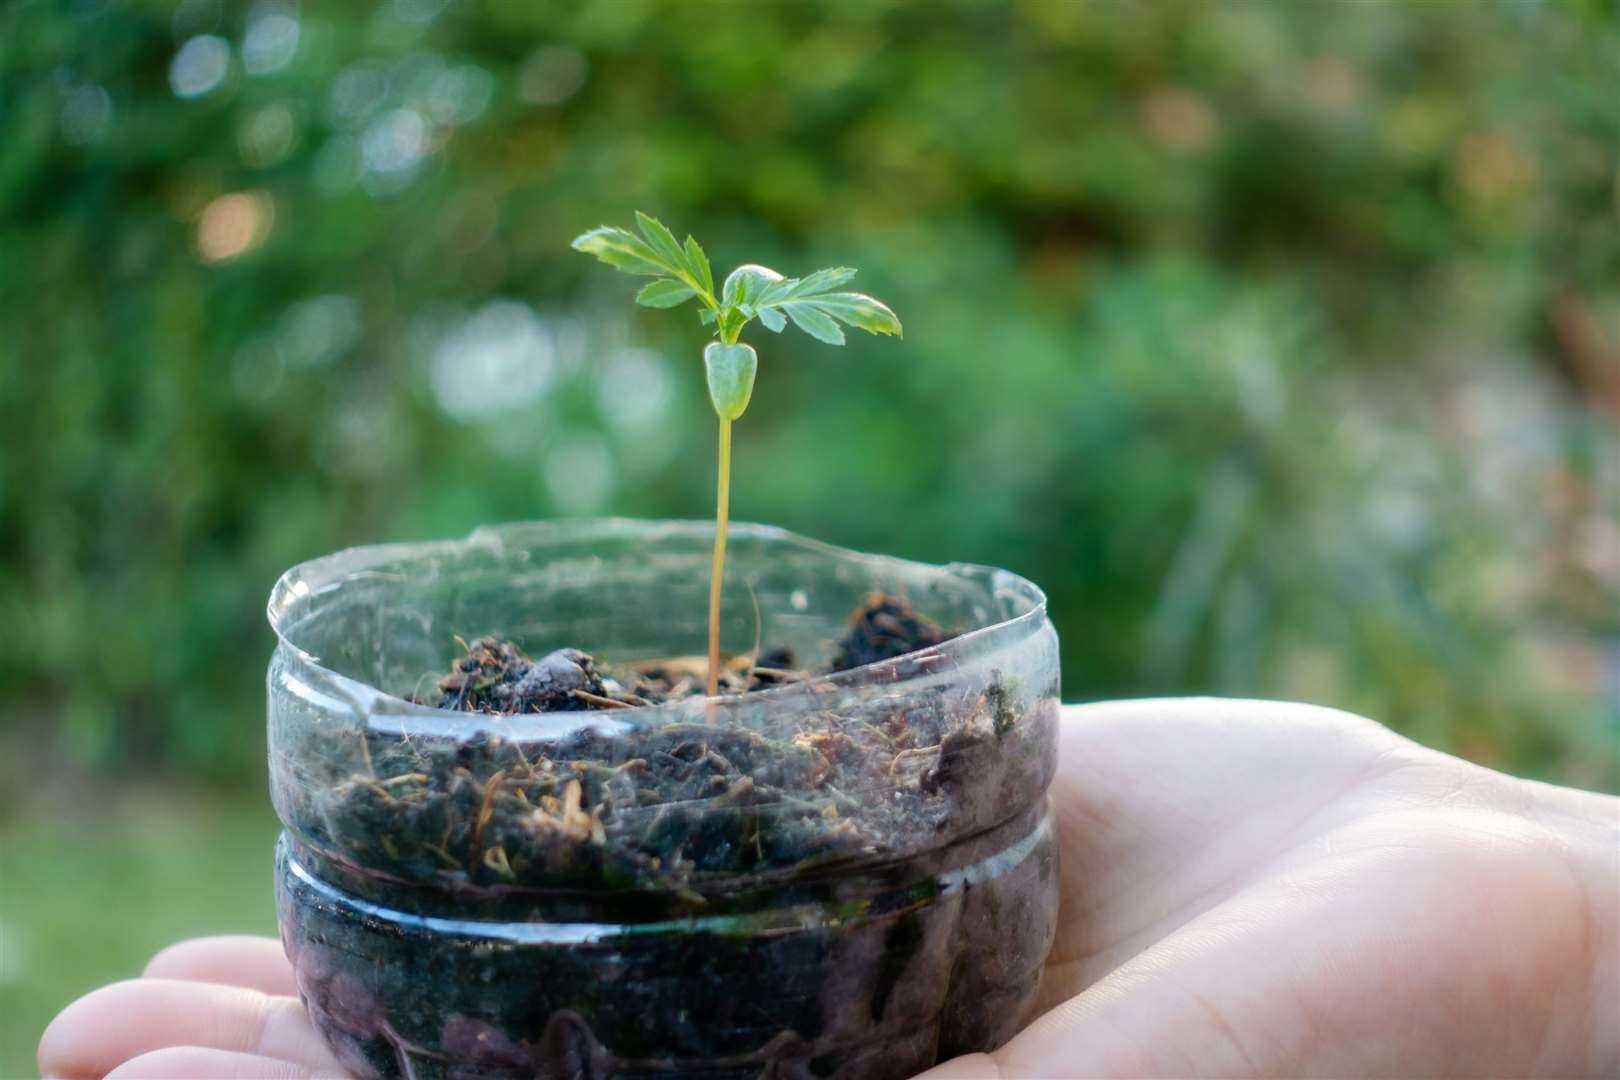 The bottom of a plastic bottle being upcycled to grow a seedling. Picture: iStock/PA